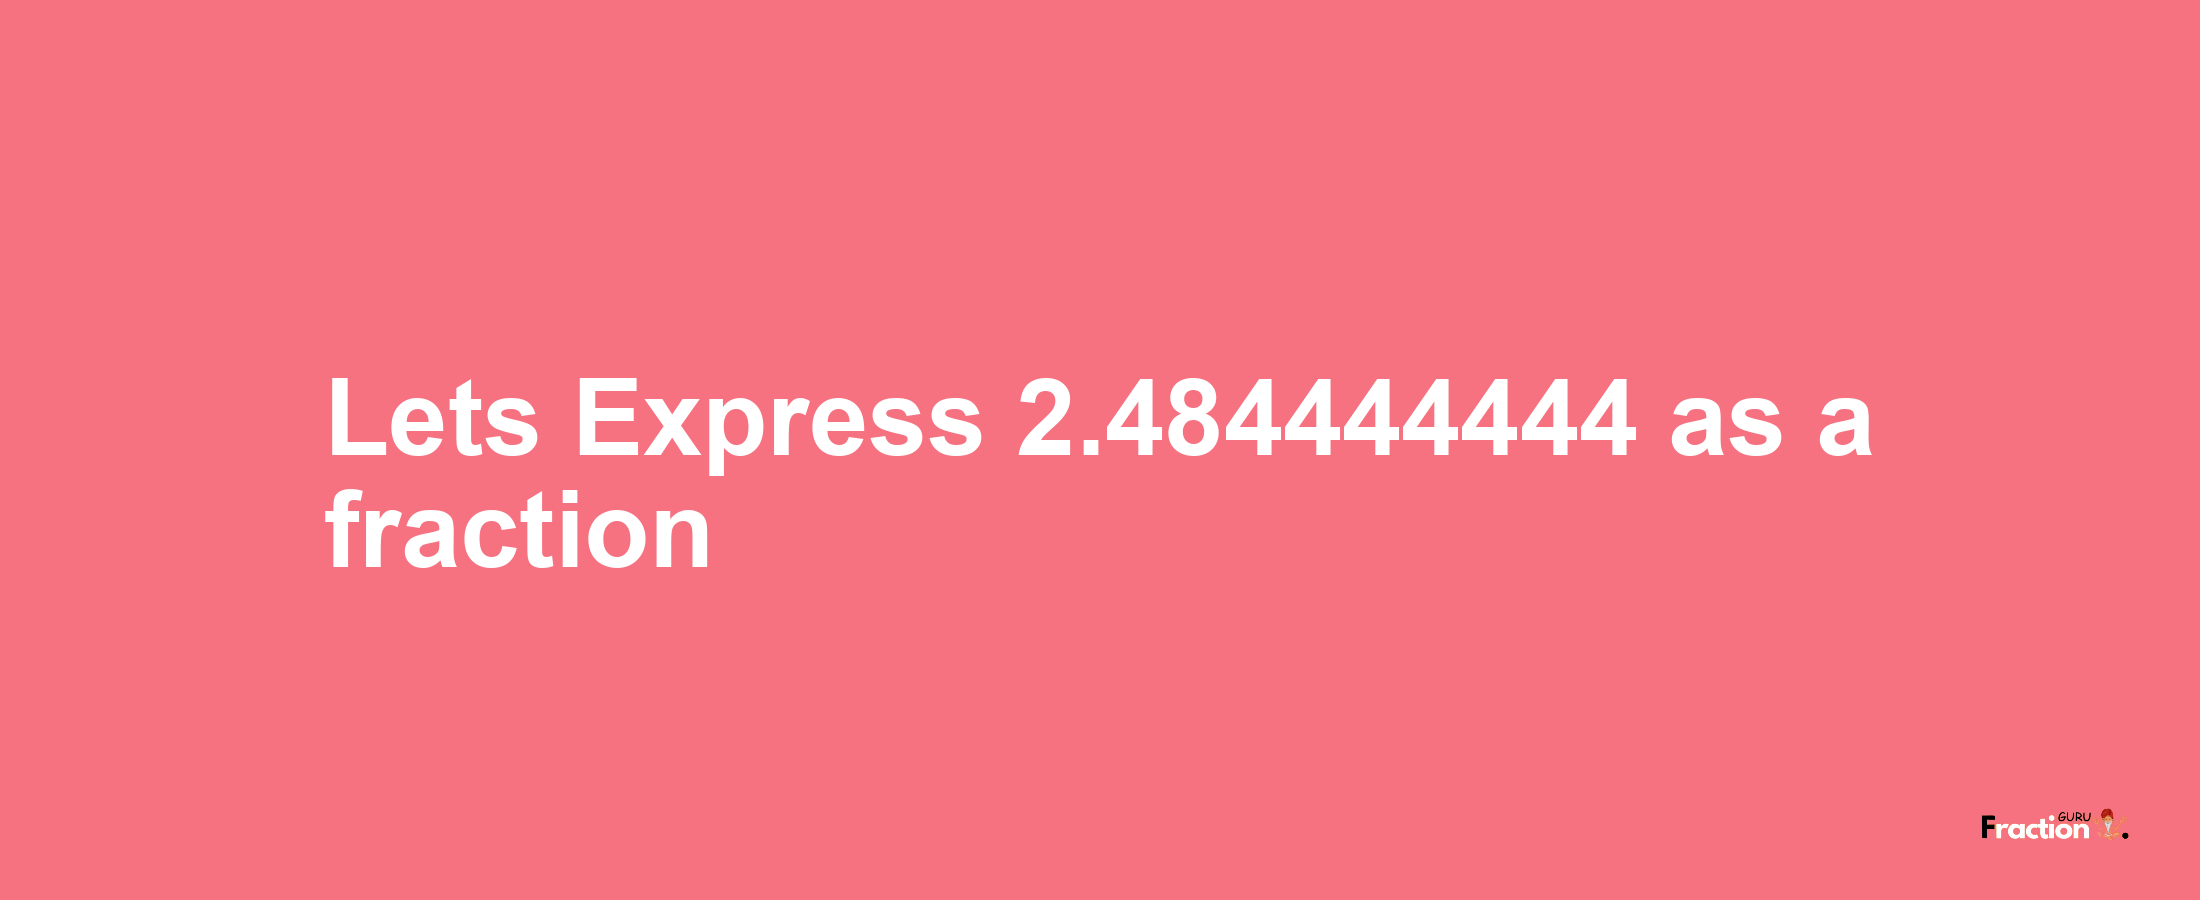 Lets Express 2.484444444 as afraction